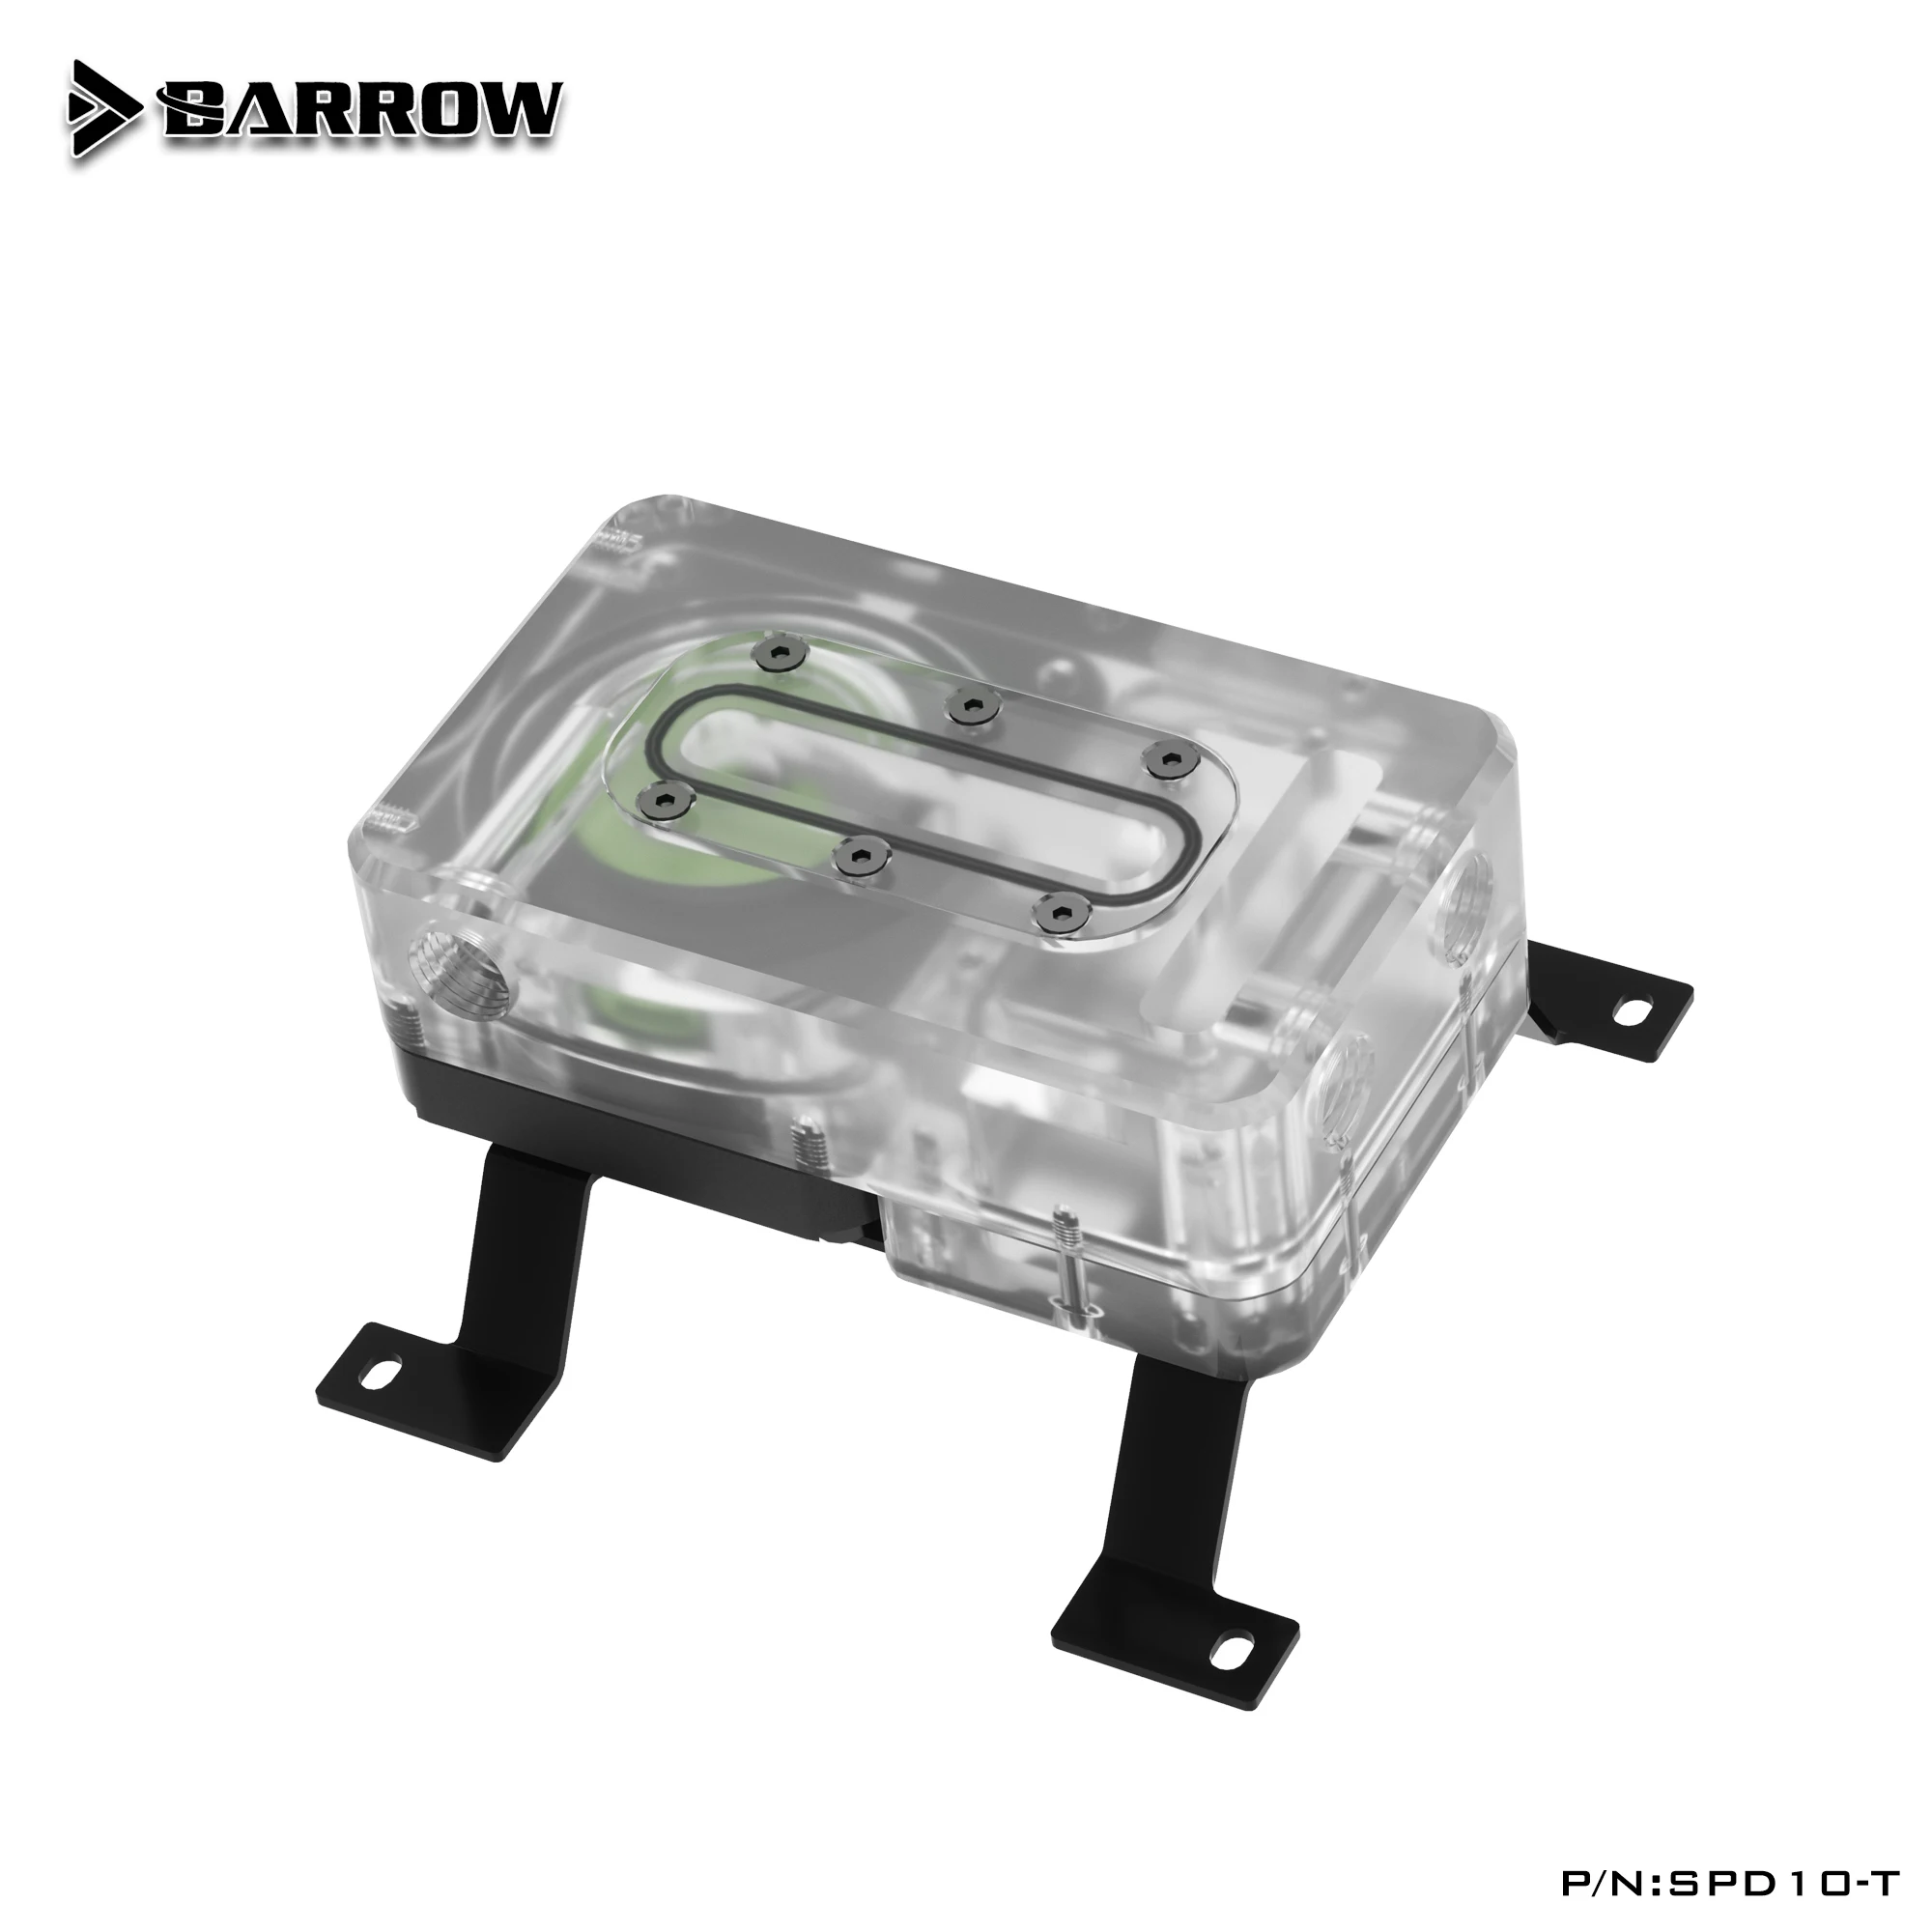 Barrow DC12V 10W PWM Water Cooler Integrated Pump Water Tank for ITX Case MINI Pump Reservoir Water Cooling System SPD10-T